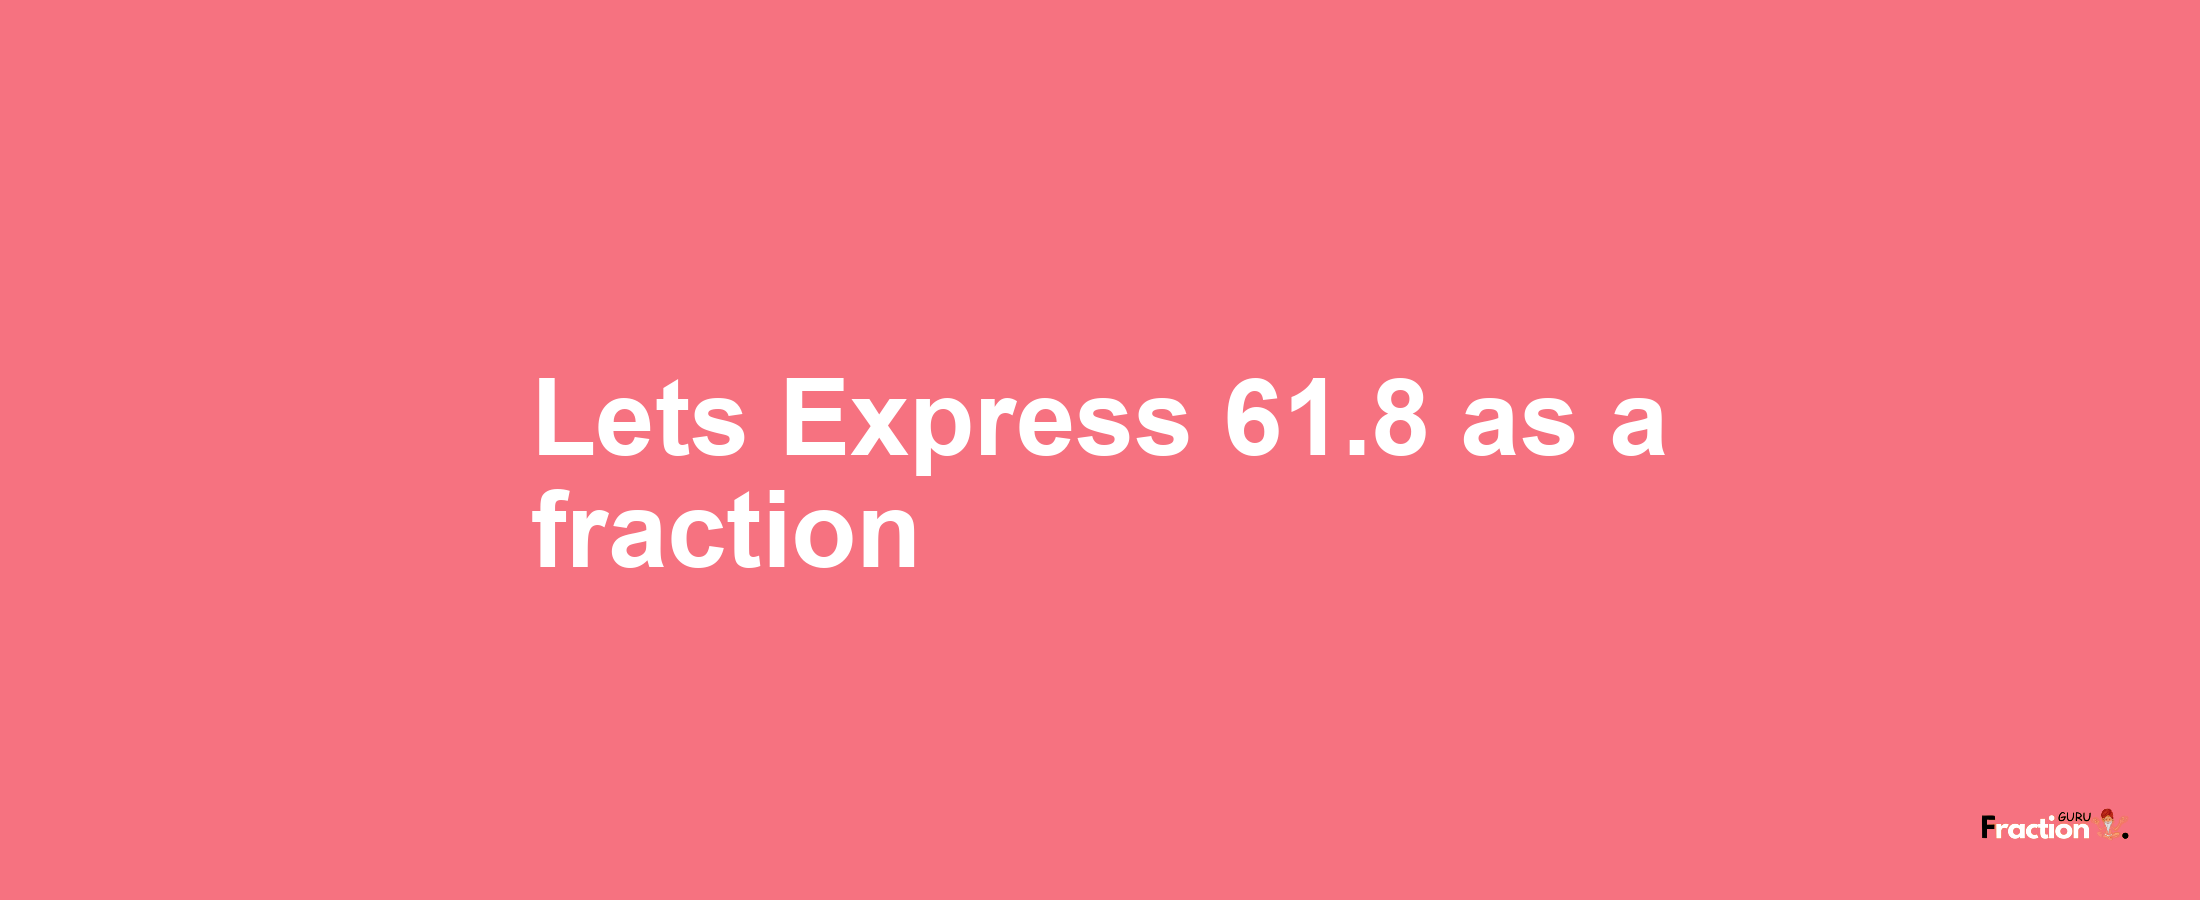 Lets Express 61.8 as afraction